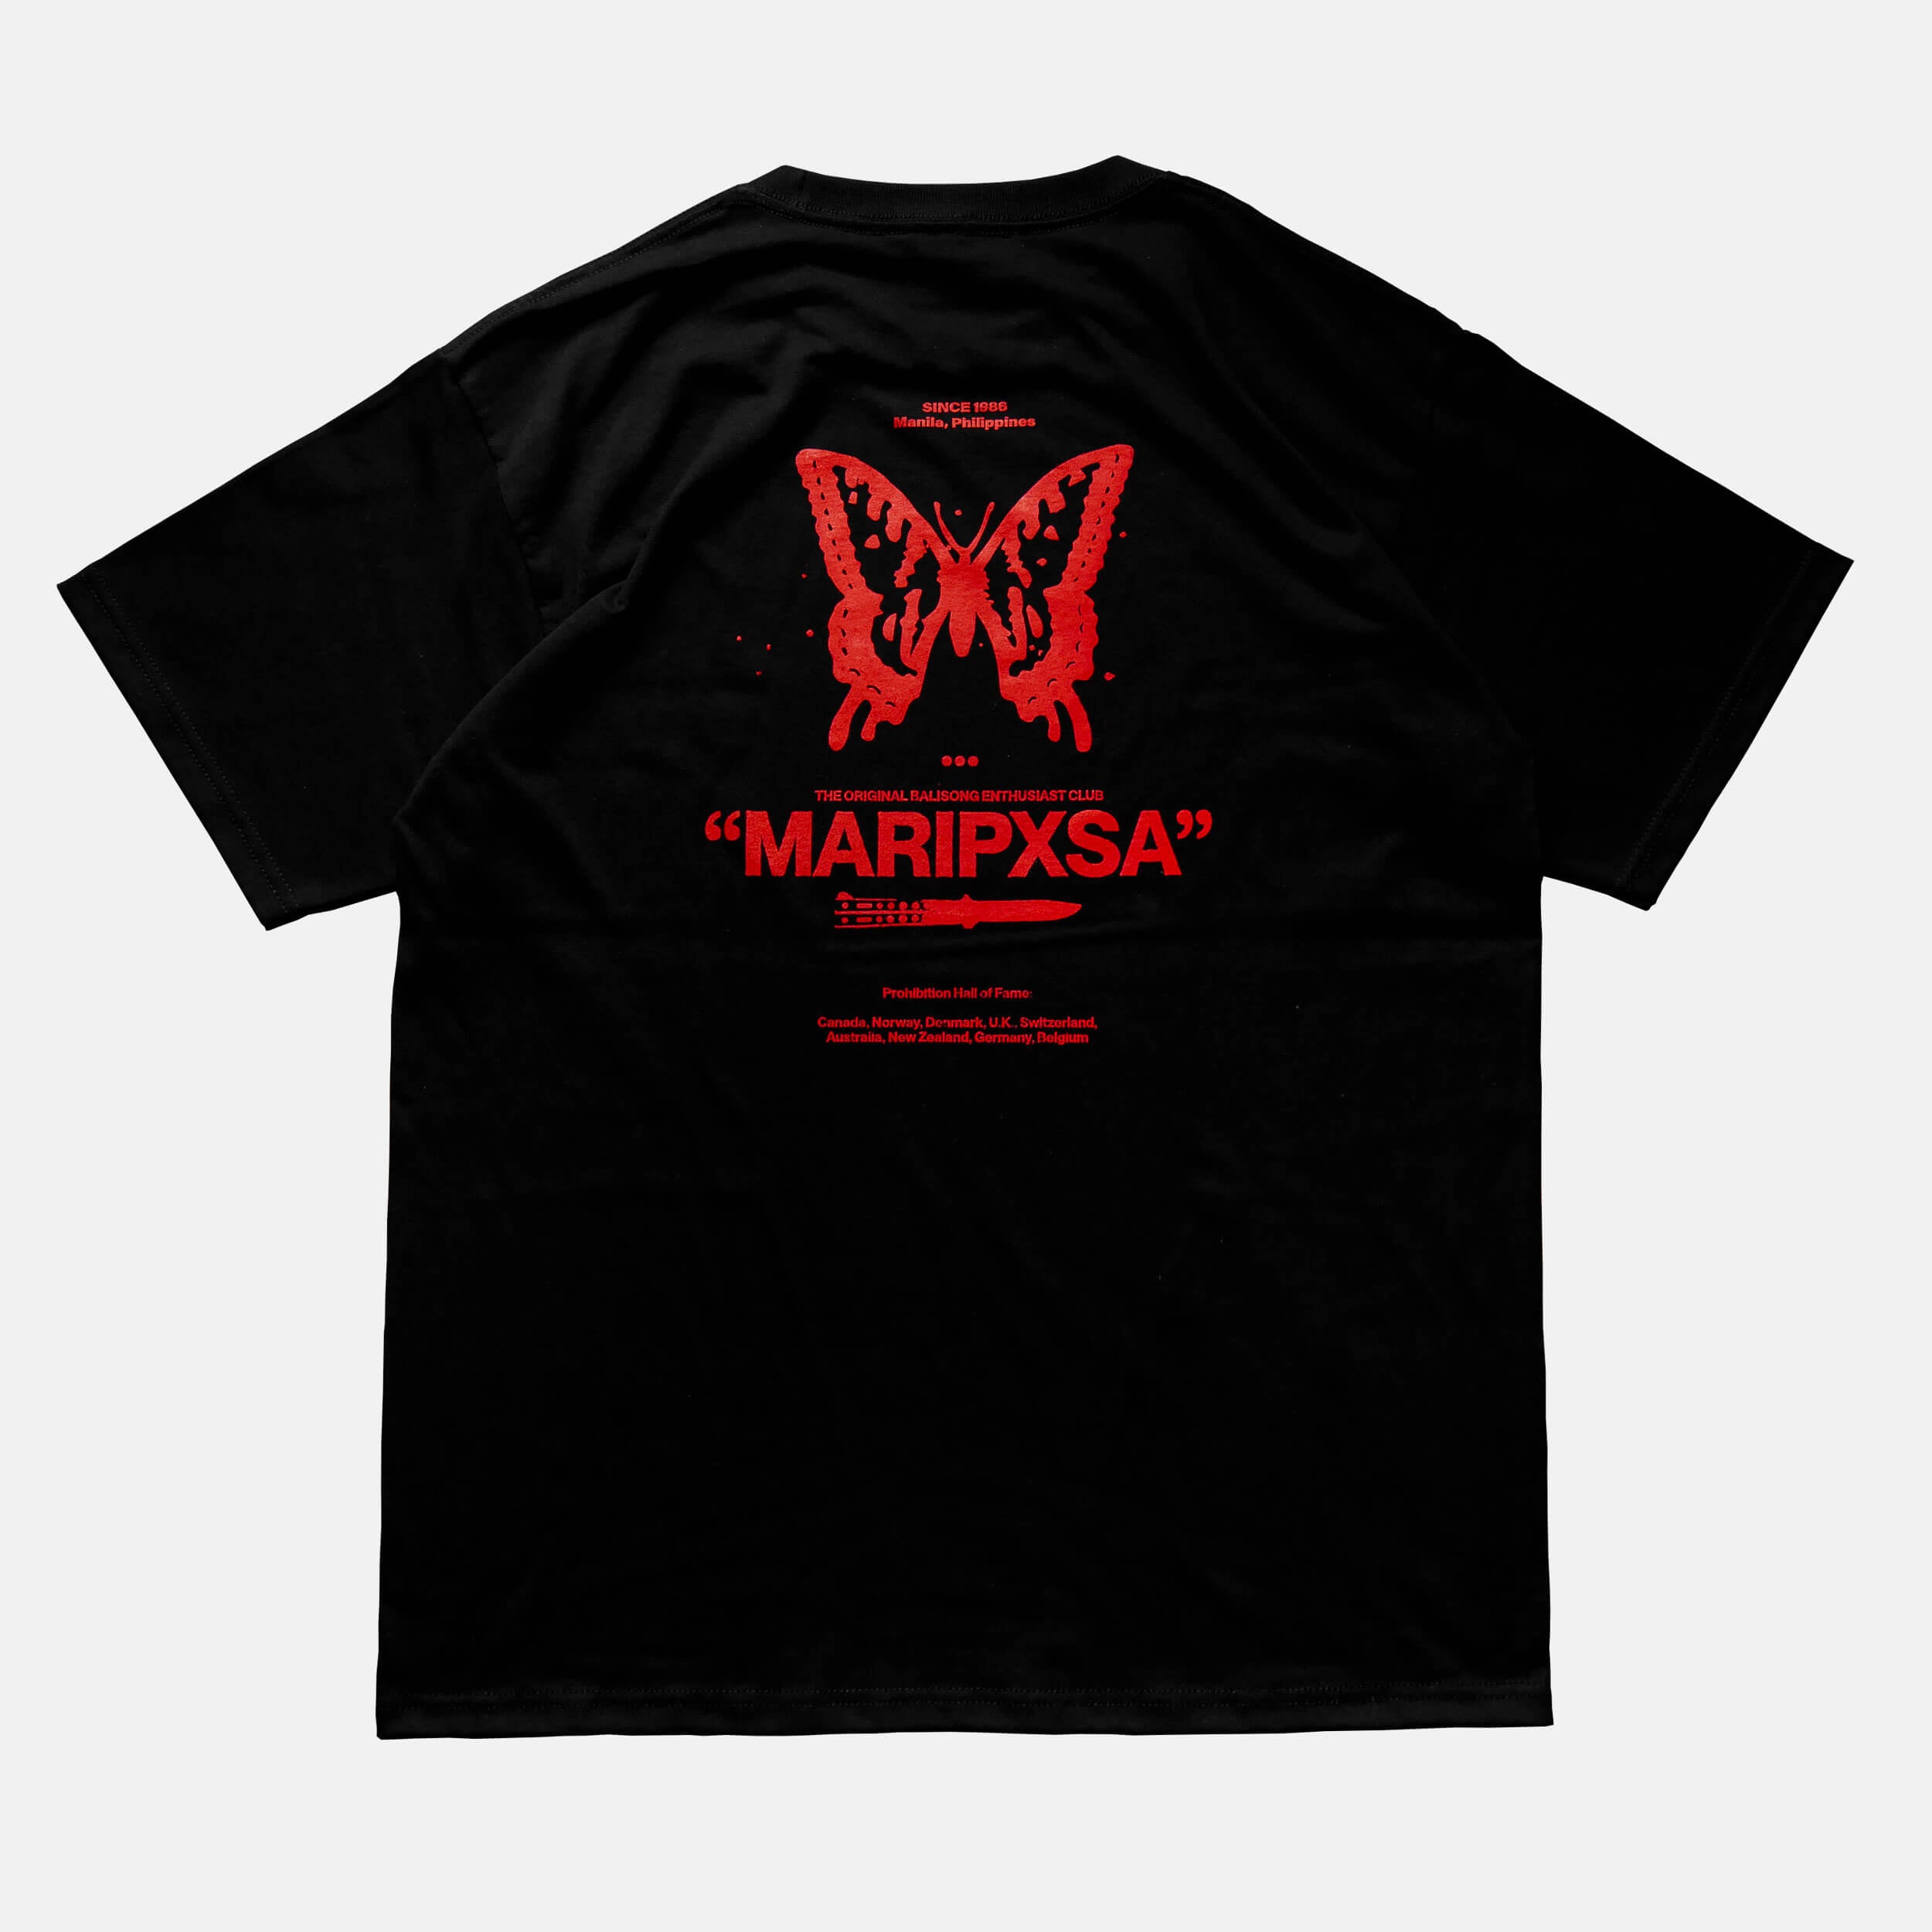 Back view of the screen-pinted 'MARIPXSA' BALISONG CLUB black t-shirt from PHOSIS Clothing